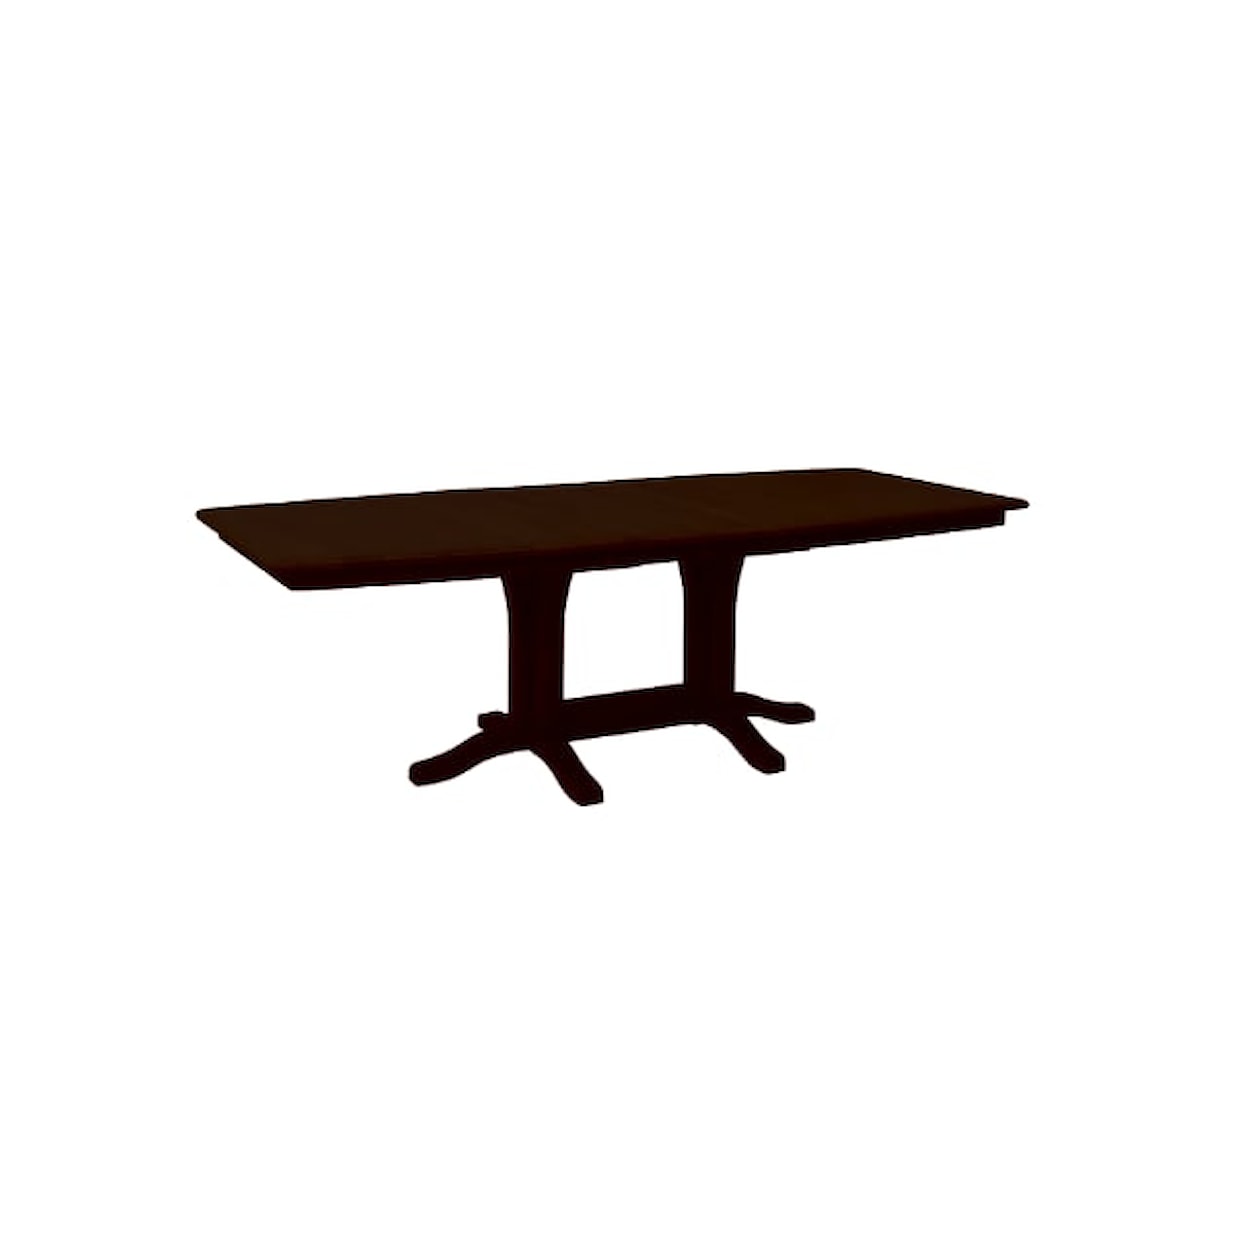 Daniel's Amish Millsdale Rectangular Dining Table with Trestle Base